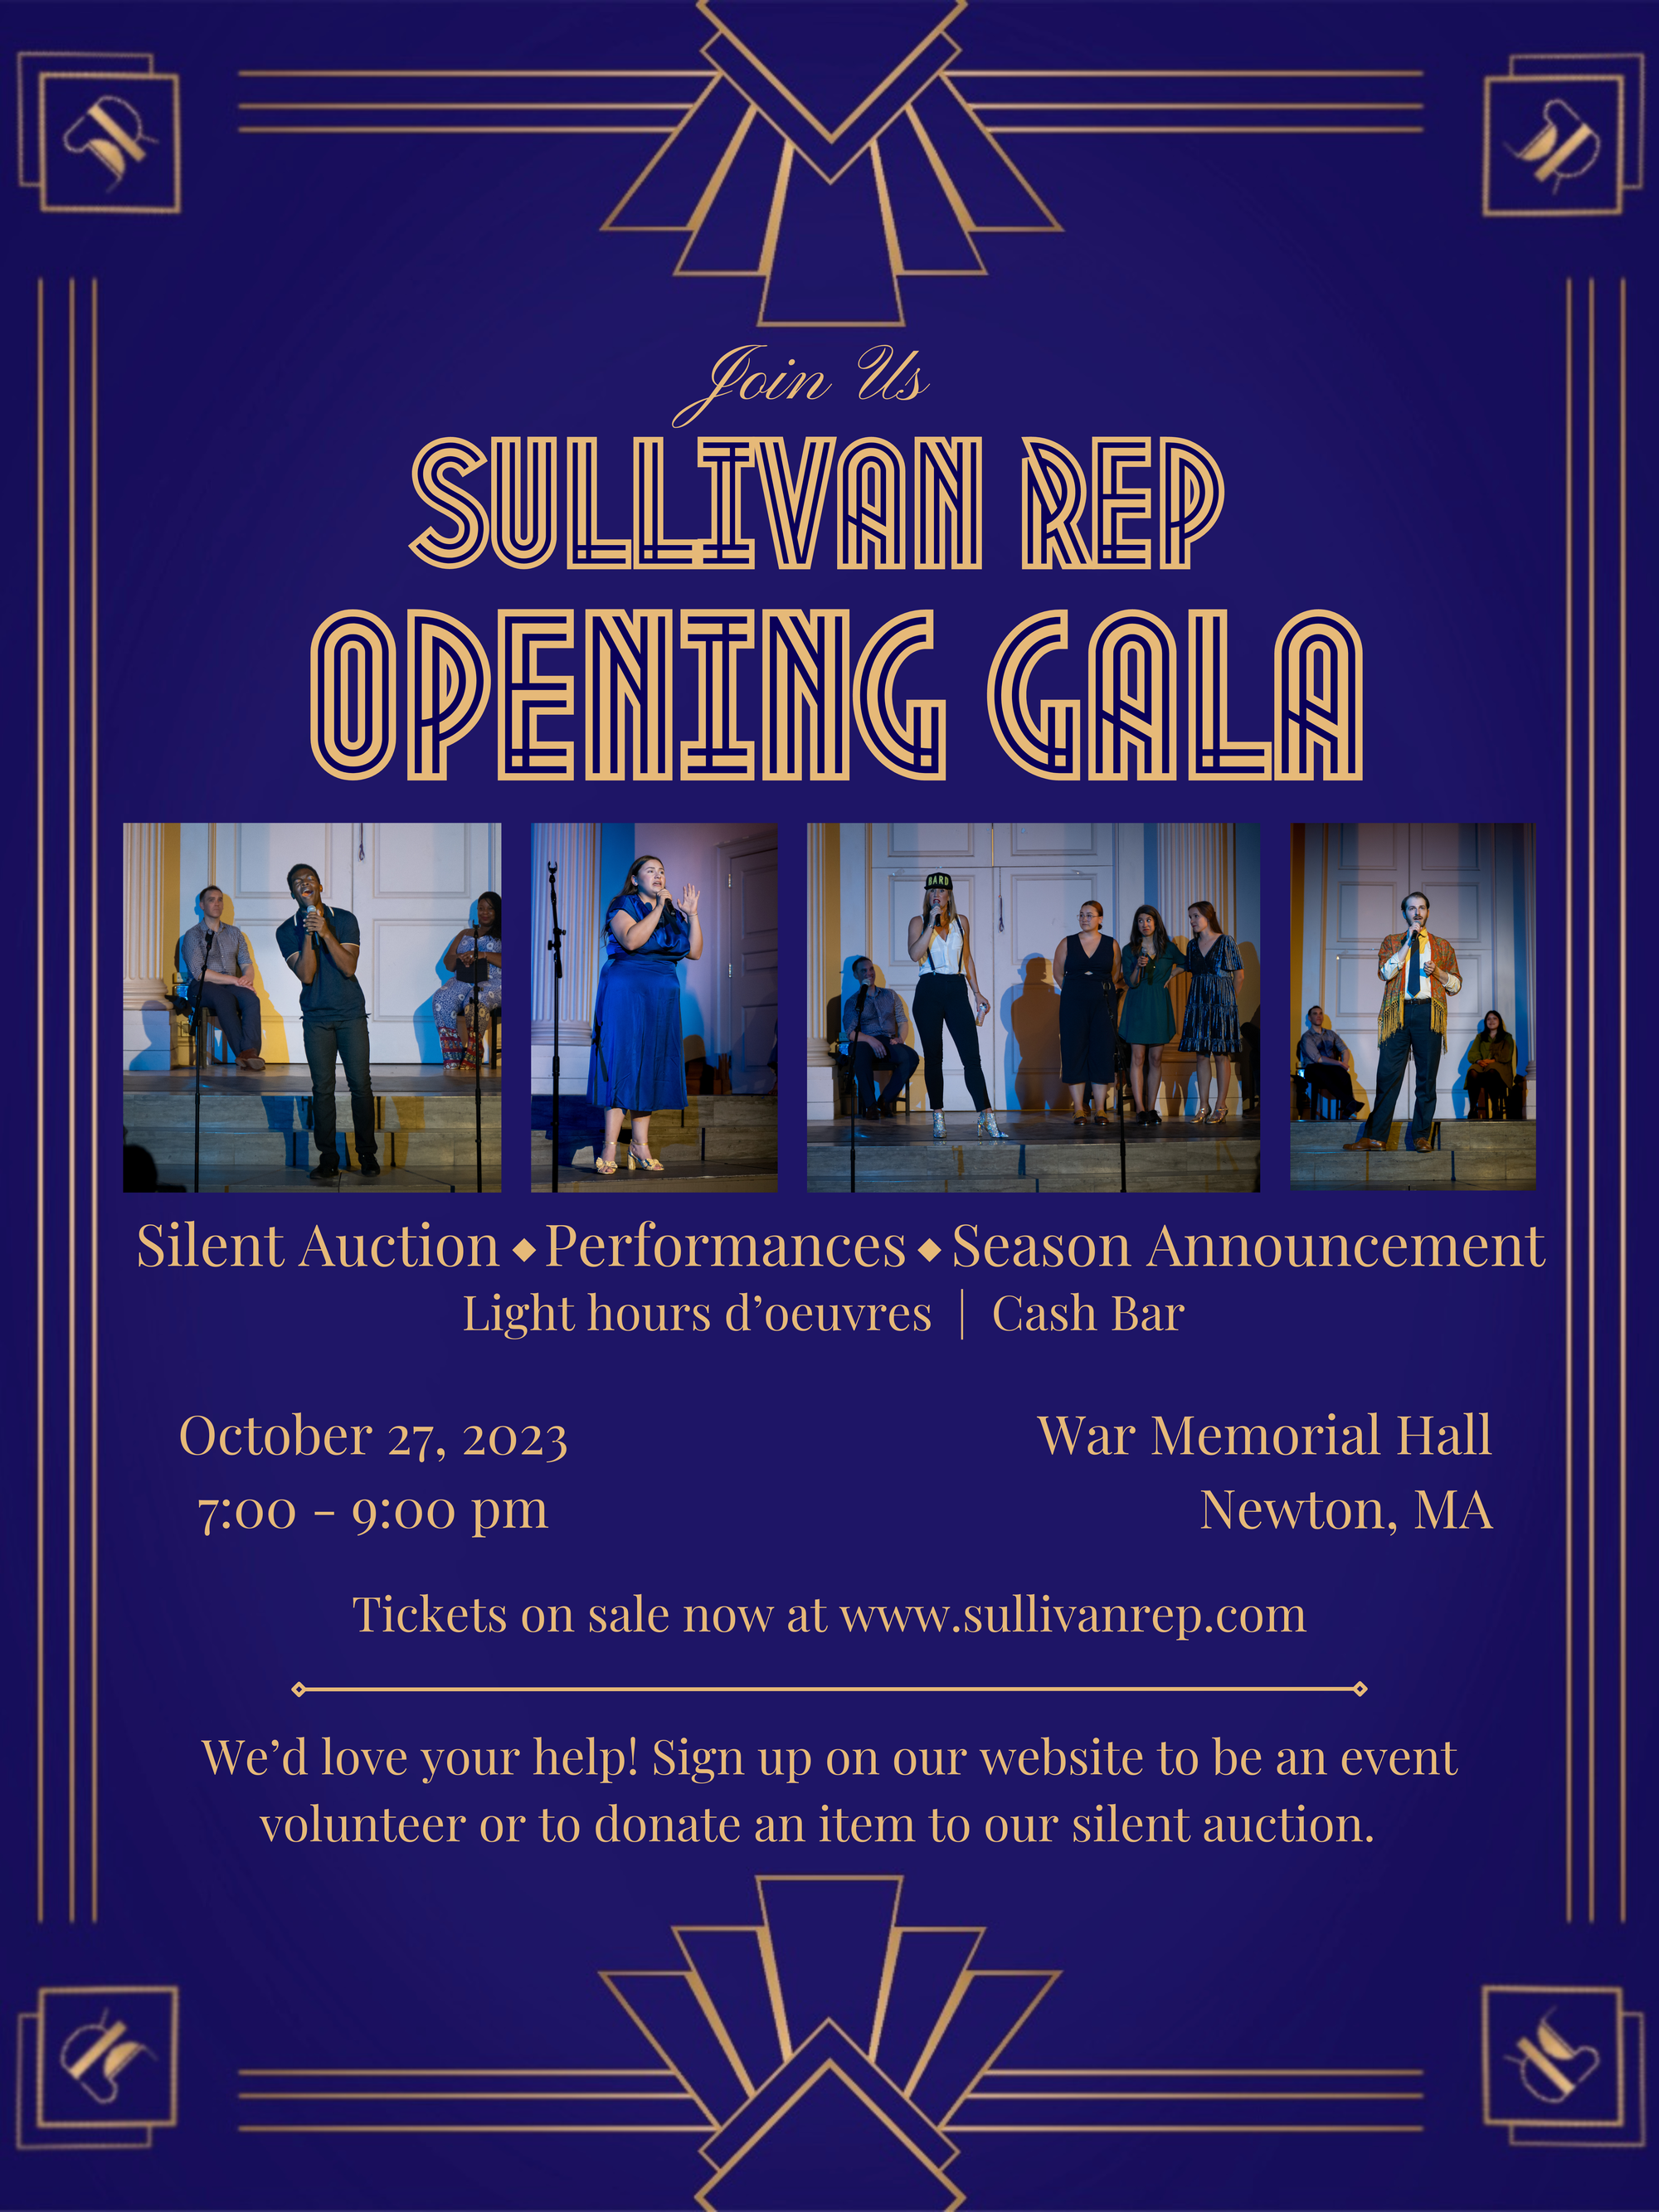 Sullivan Rep's Opening Gala to take place at War Memorial Hall (Newton, MA.)